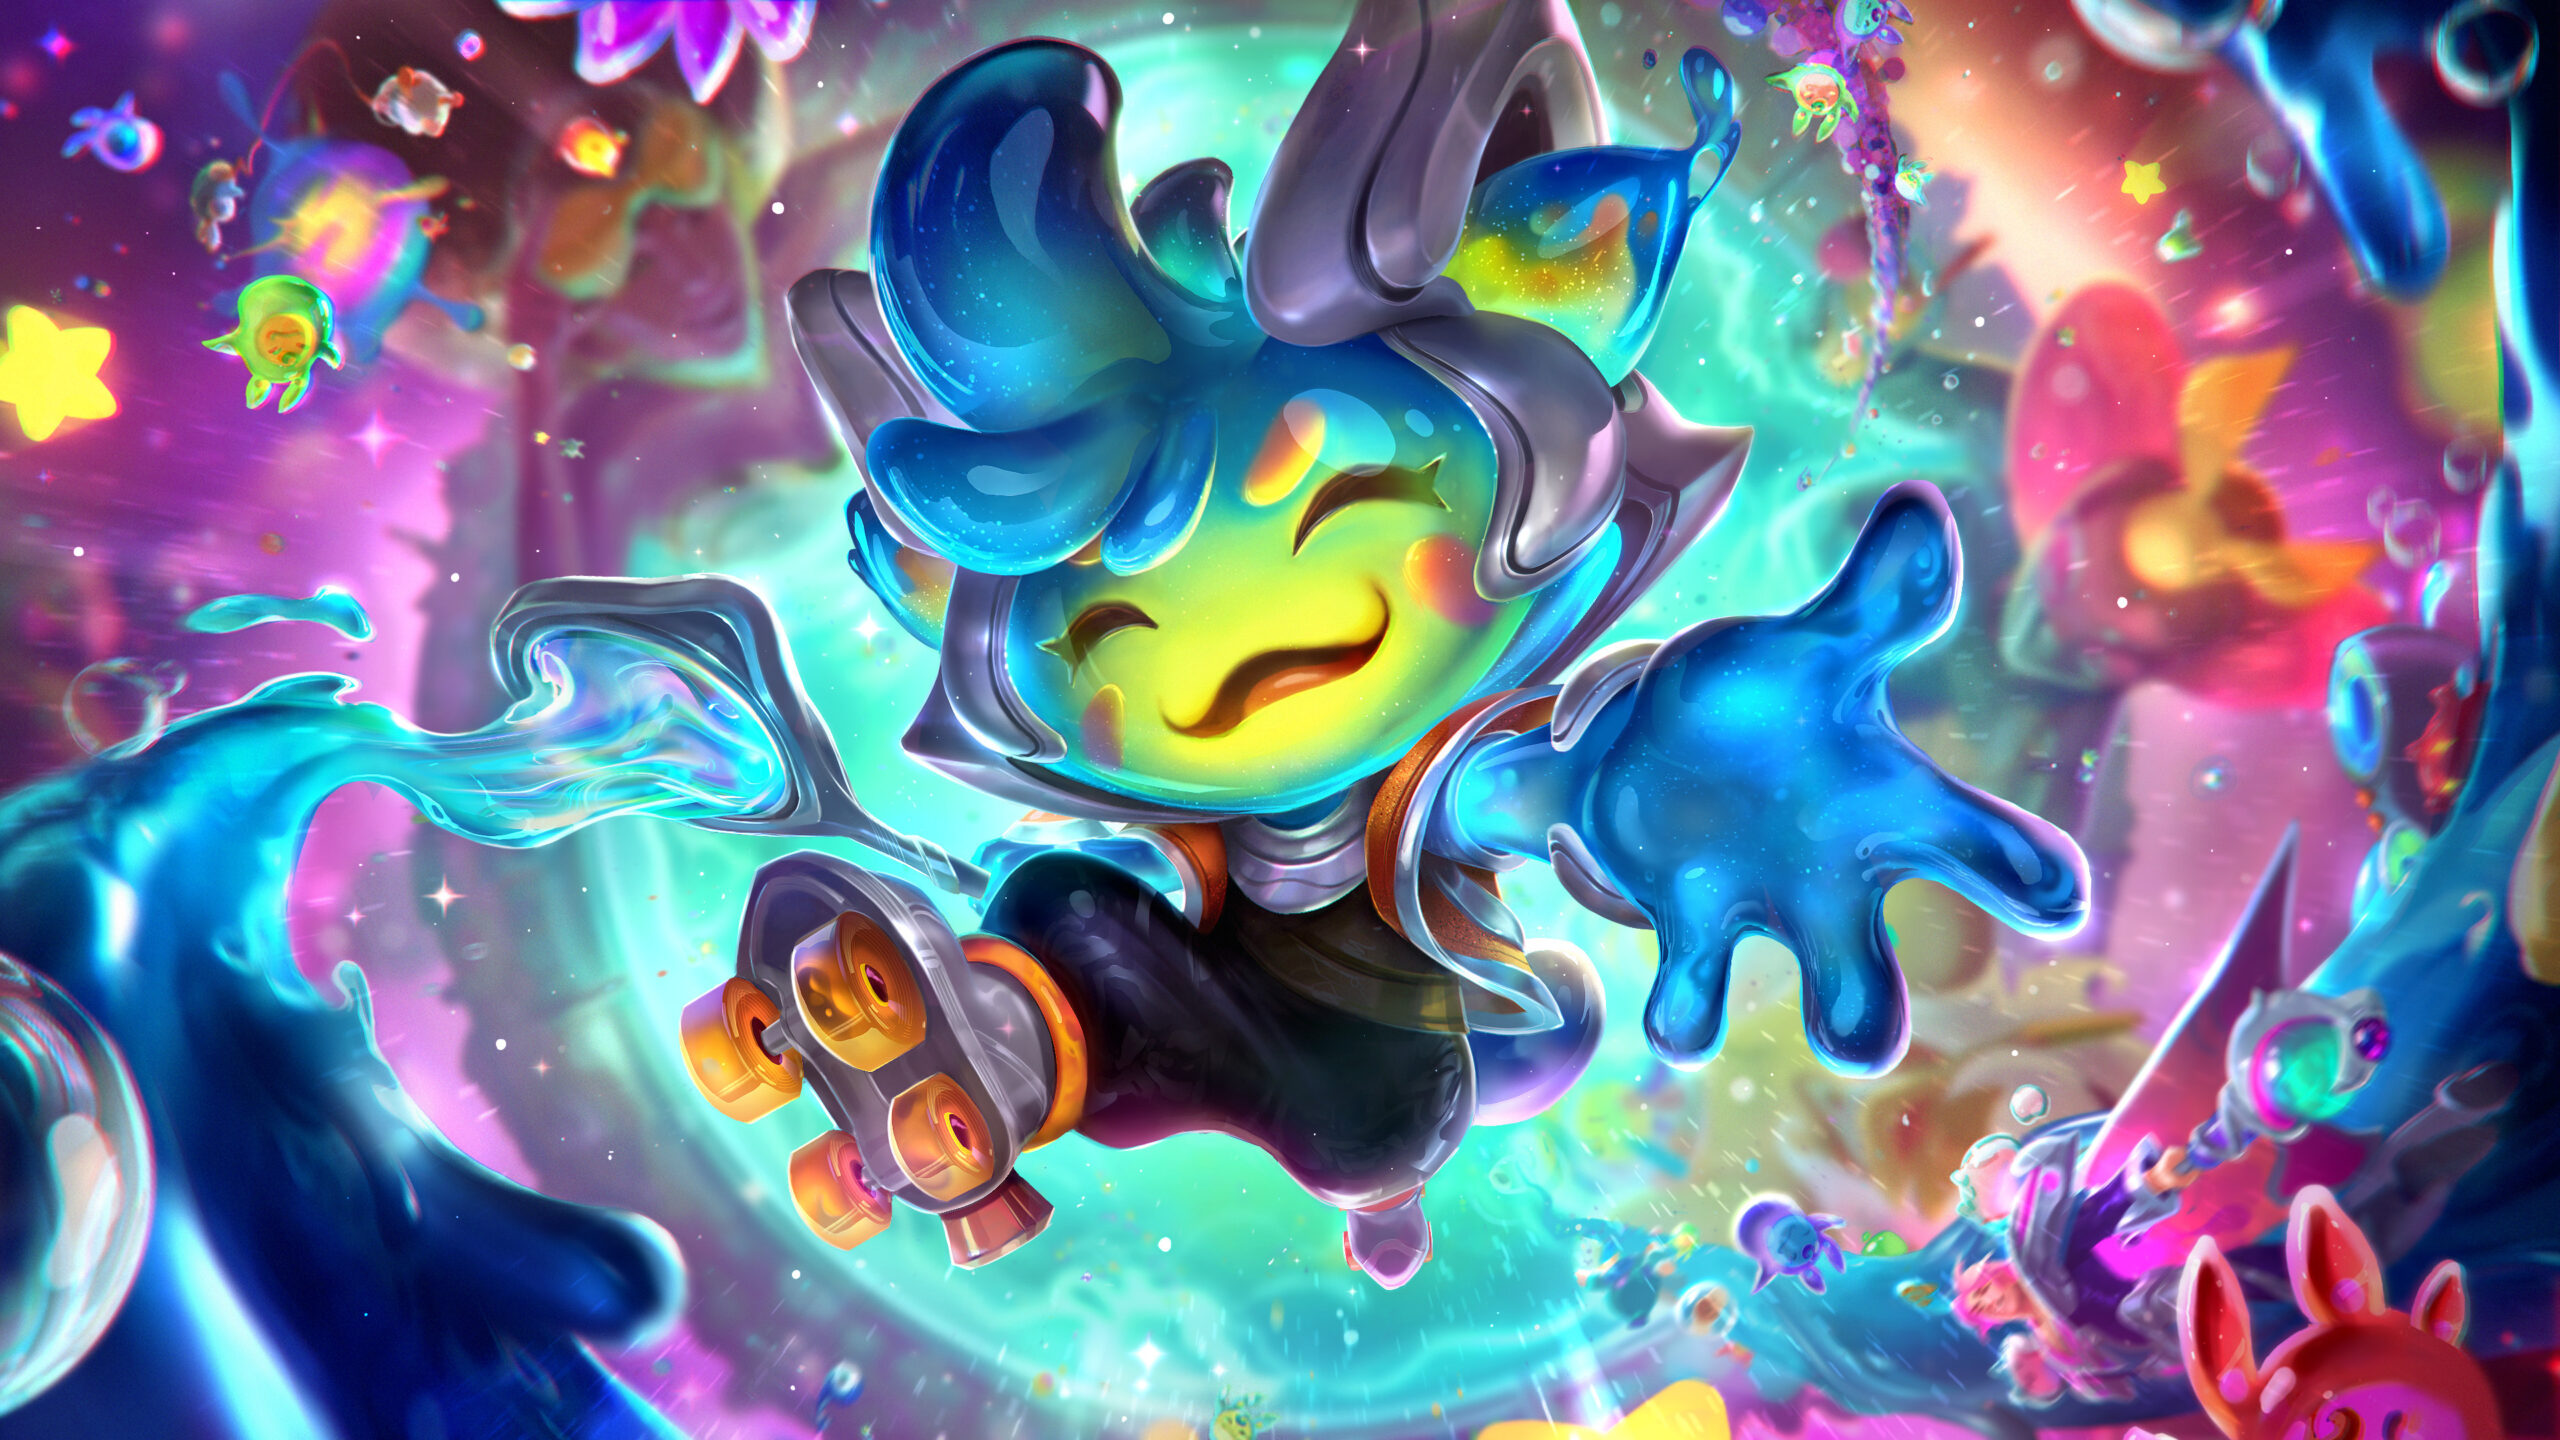 Full Revealed Of Space Groove Skins Splash Arts Prices And More